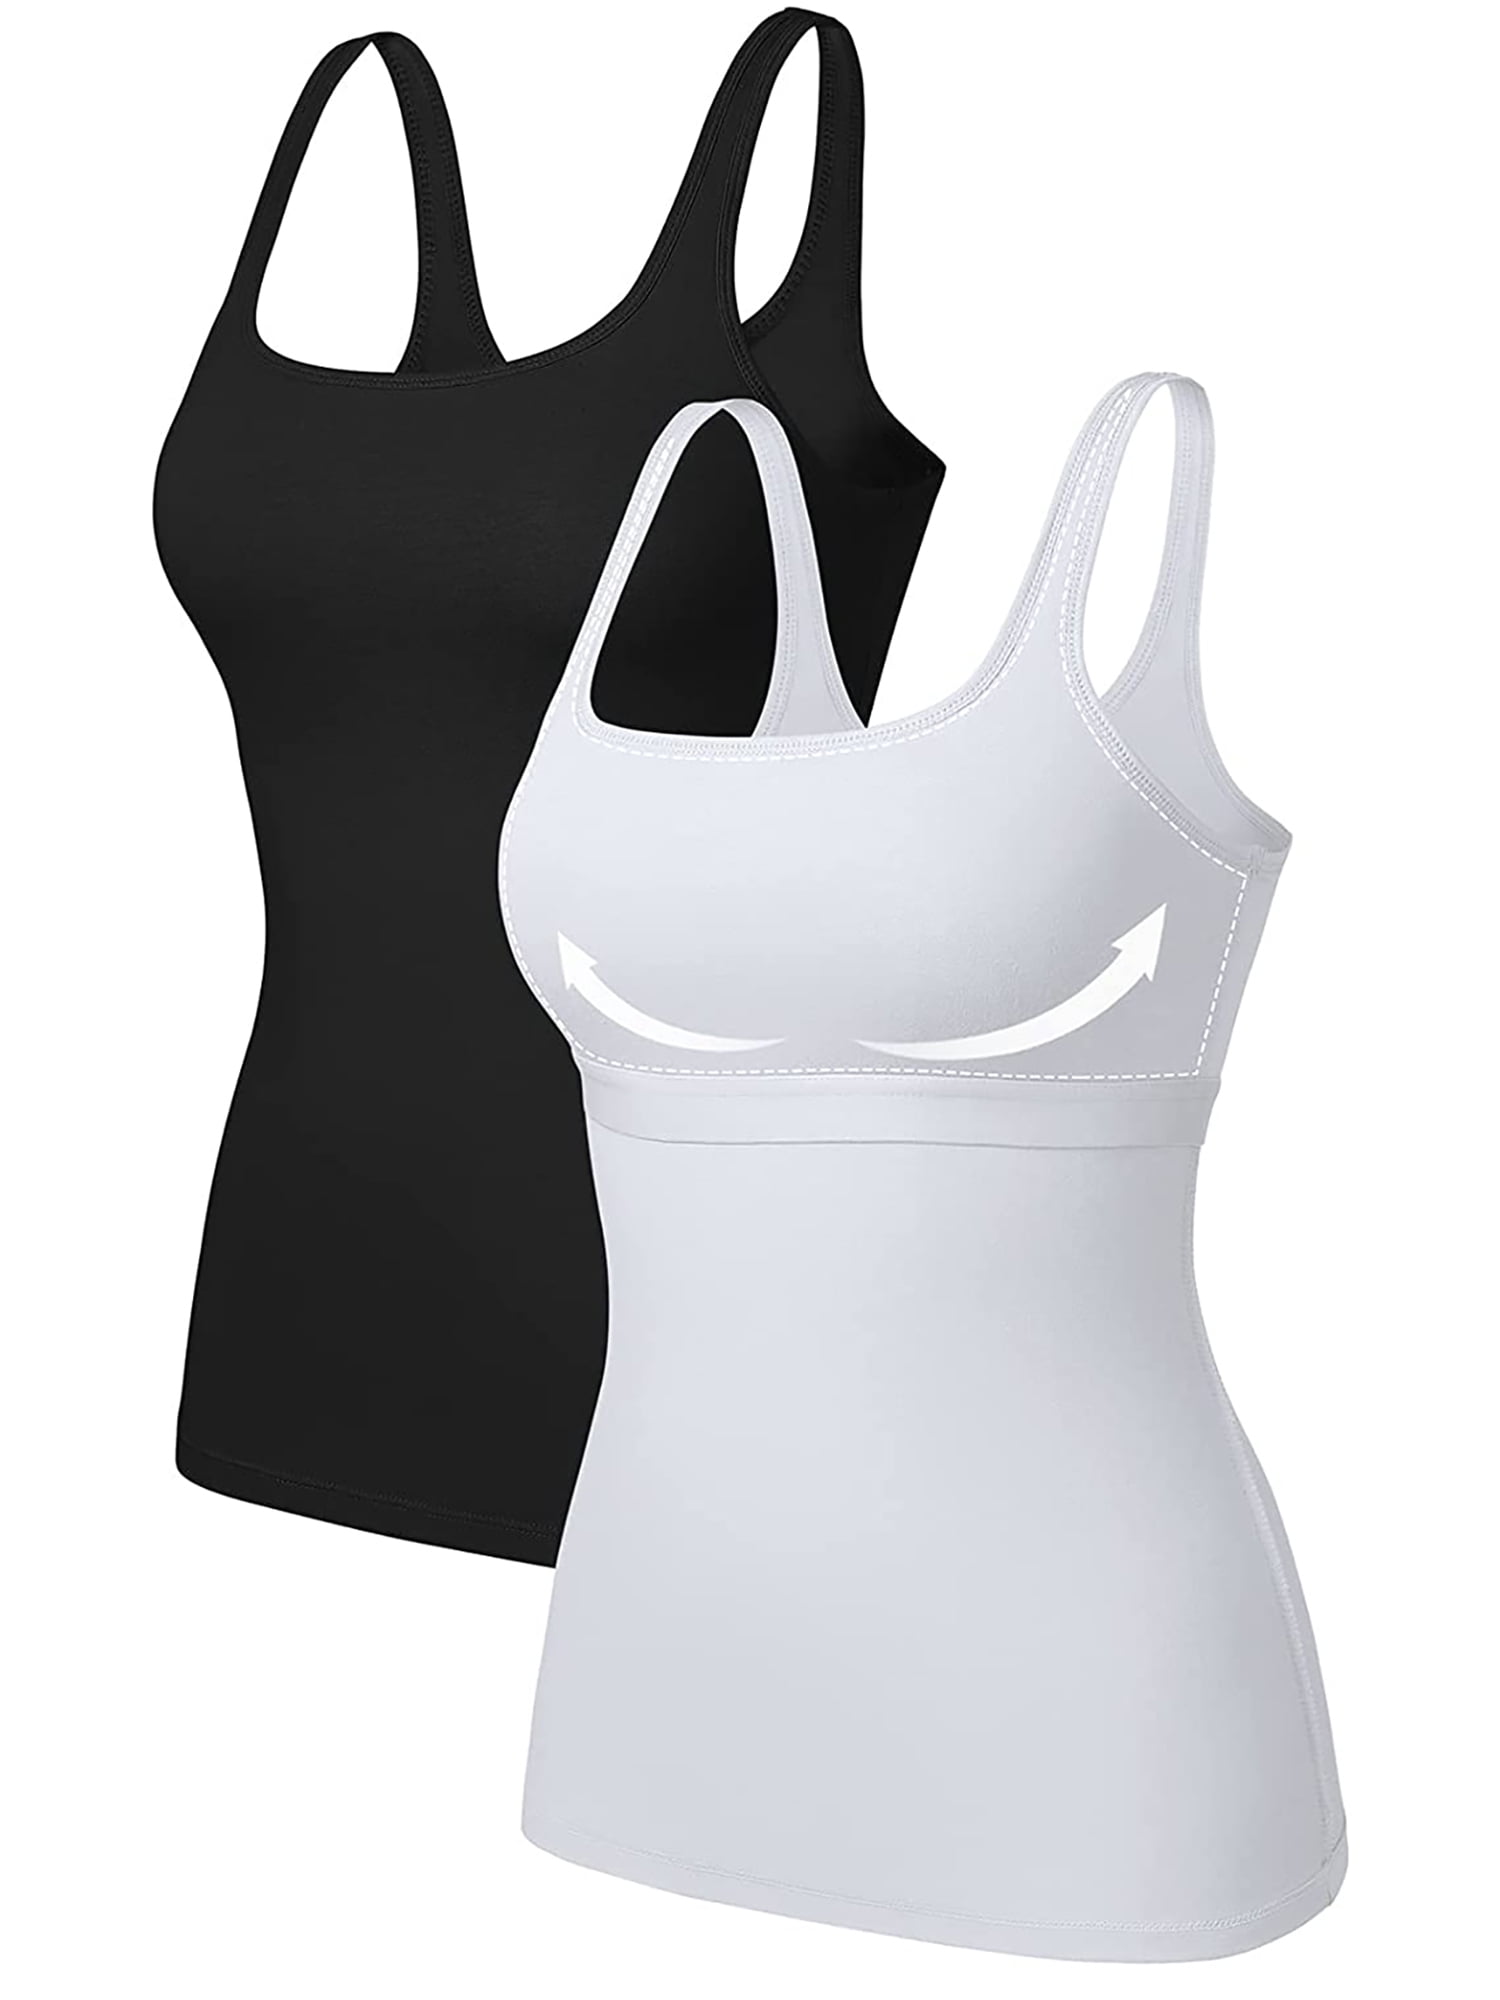 V FOR CITY Tank Top for Women with Built-in Shelf Bra Cotton Wide Strap Camisole Square Neck Cami Tanks 2 Pack 